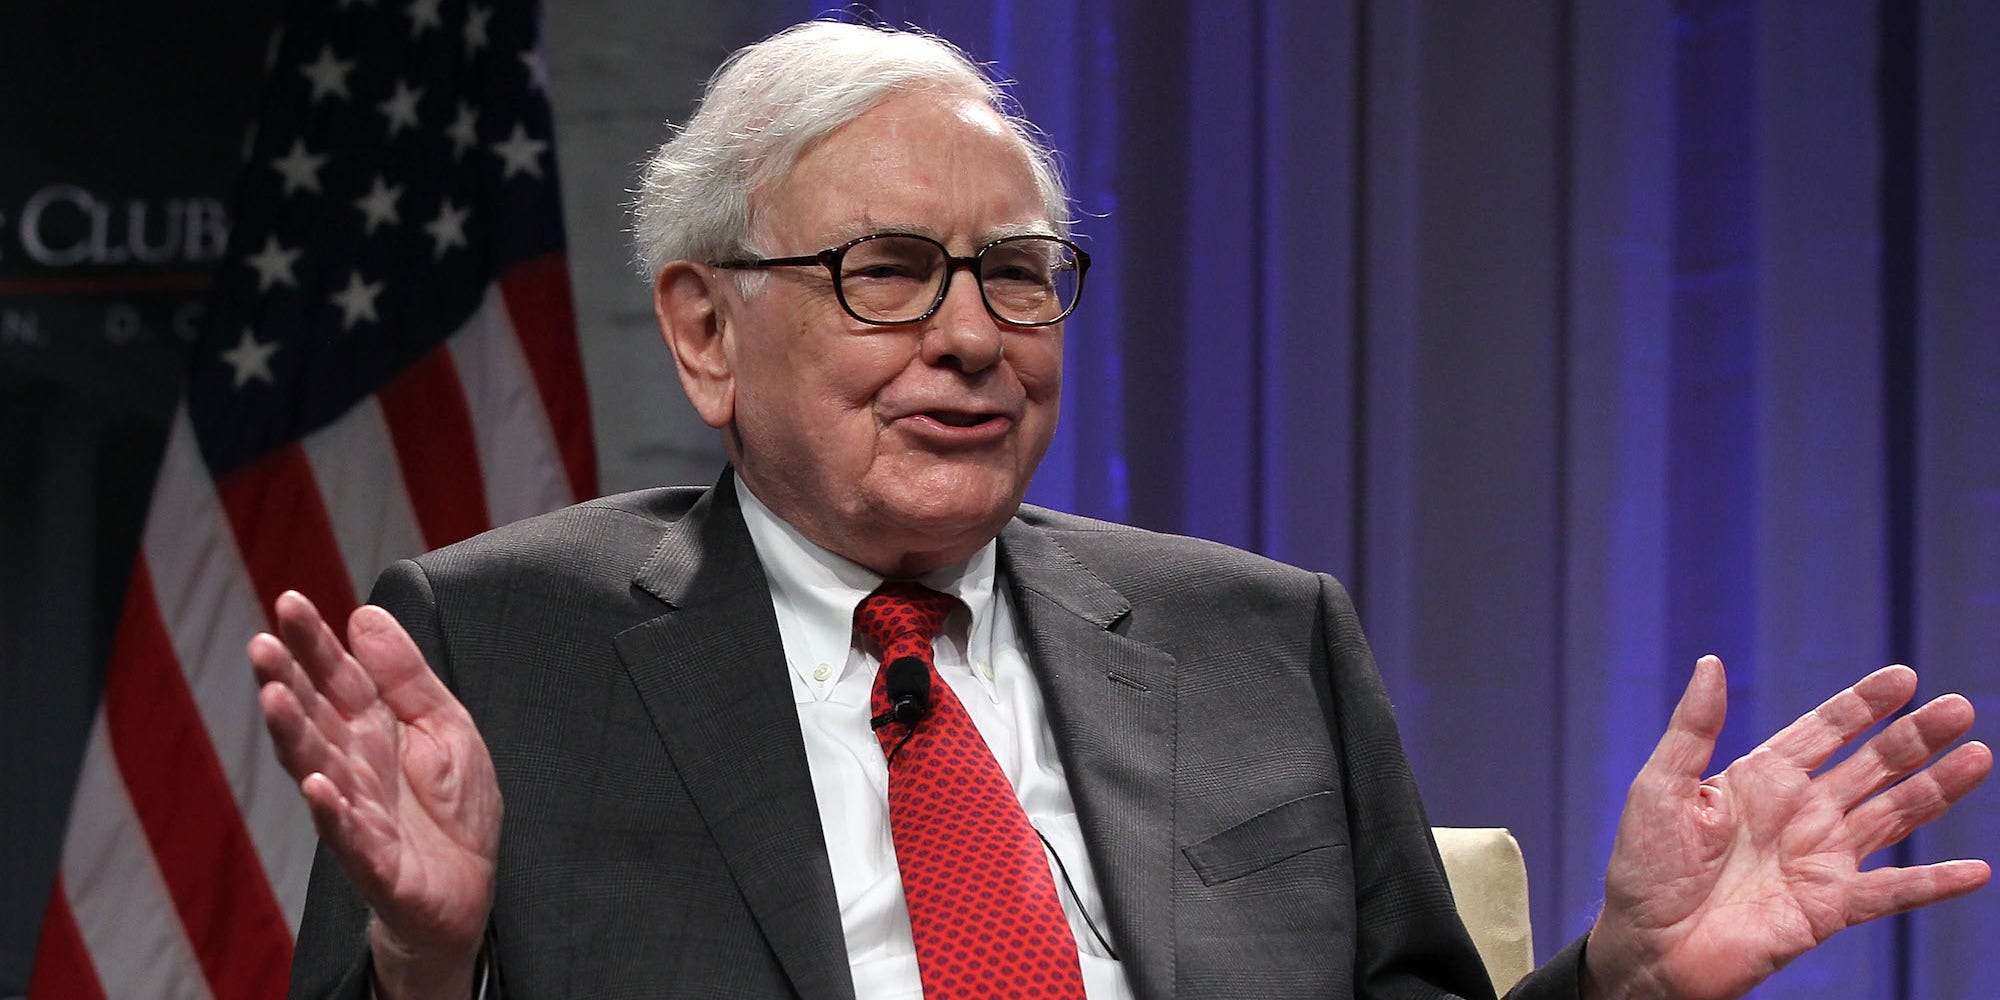 Warren Buffett plowed $5 billion into Bank of America during the debt crisis. Here’s the story of how the investor helped the bank and made a fortune in the process. | Markets – Business Insider